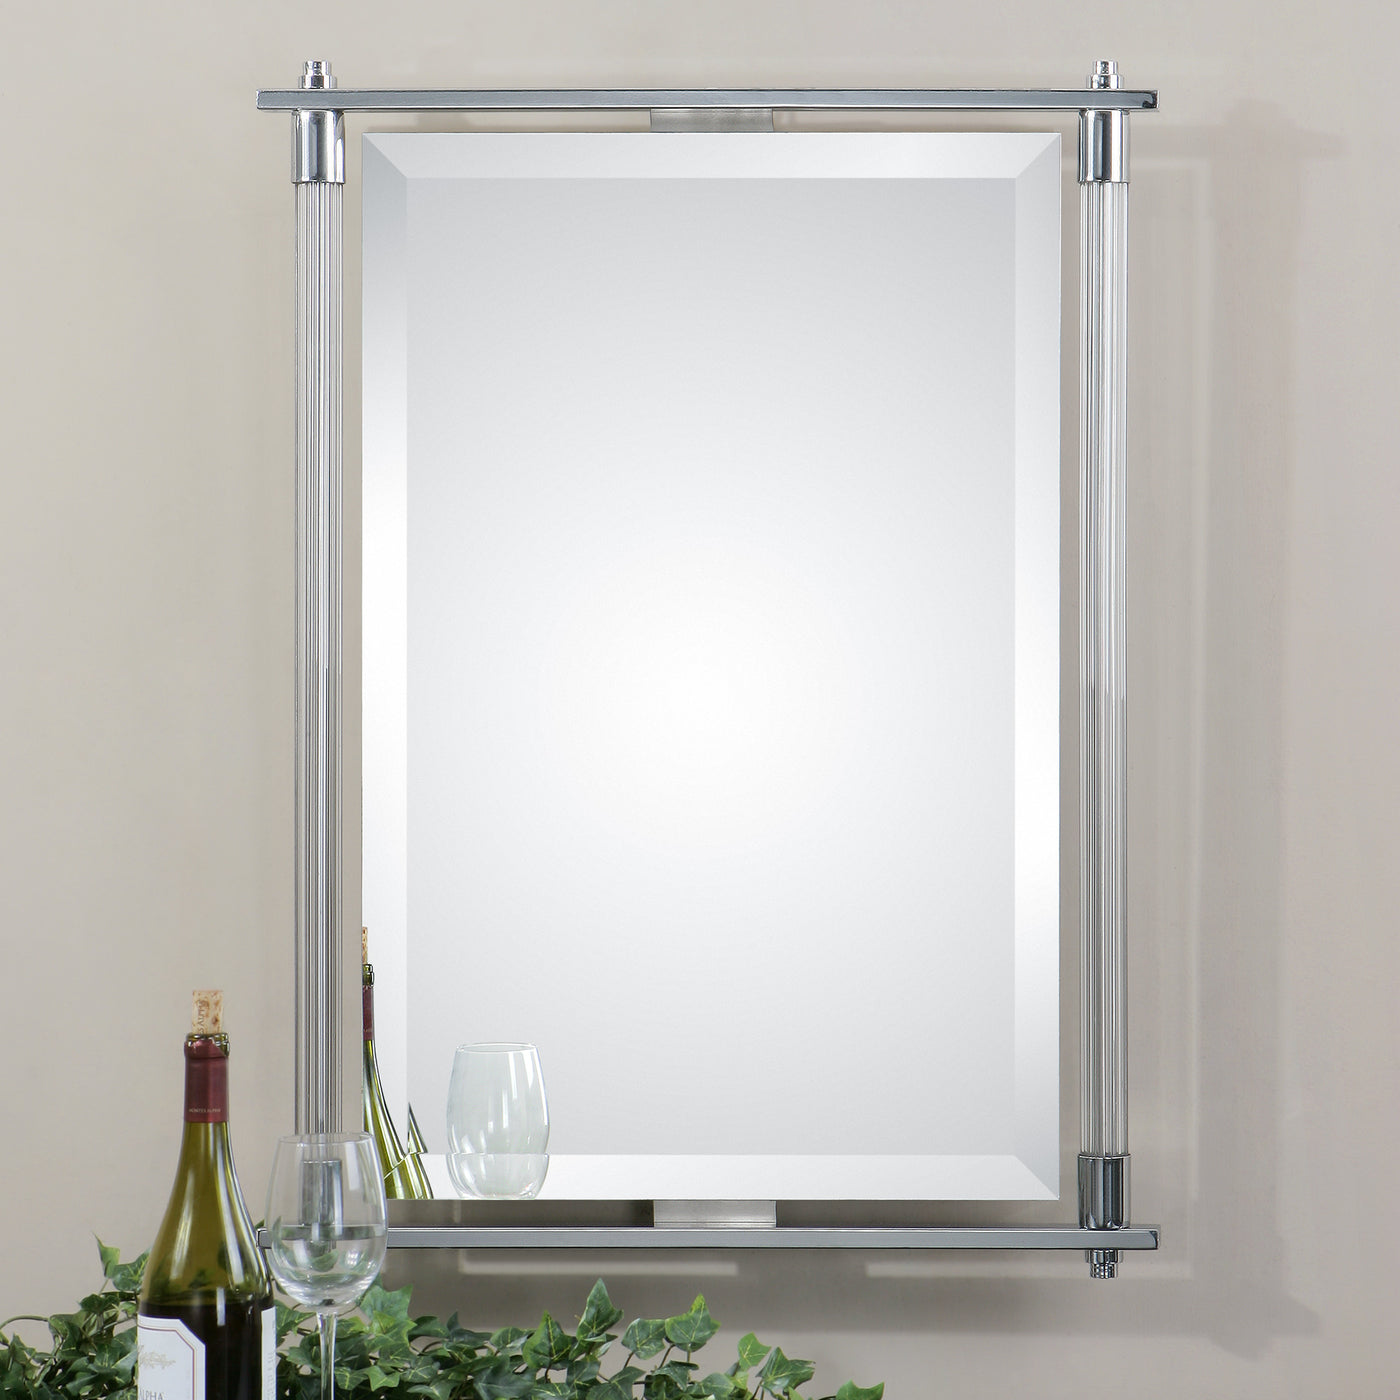 Ribbed Glass Columns Accented With Polished Chrome Plated Details. Mirror Features A Generous 1 1/4" Bevel And May Be Hung...